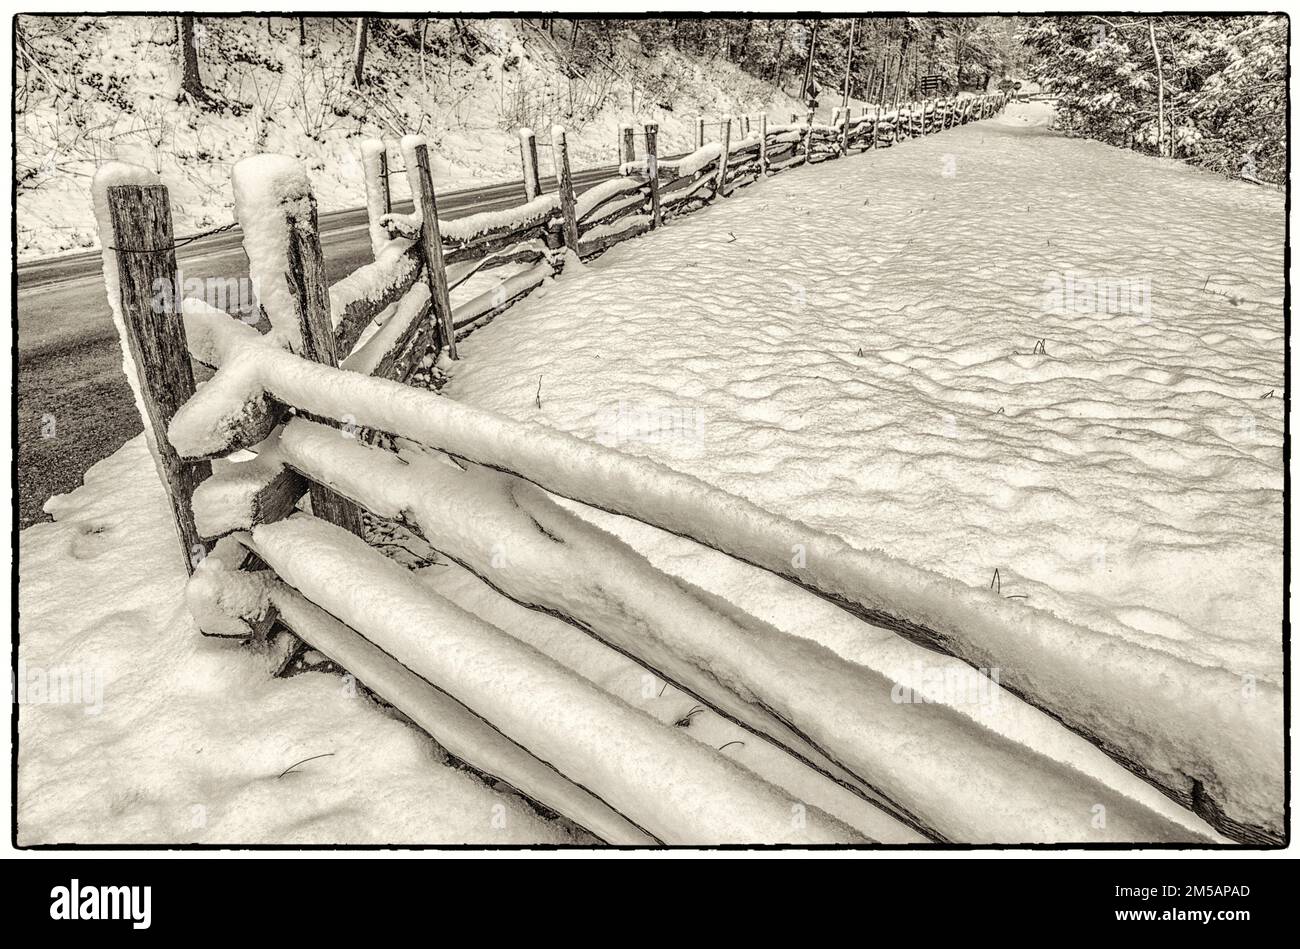 A black and white photograph of an early springtime snow in the Great Smoky Mountains National Park.  The image has a rough black border. Stock Photo